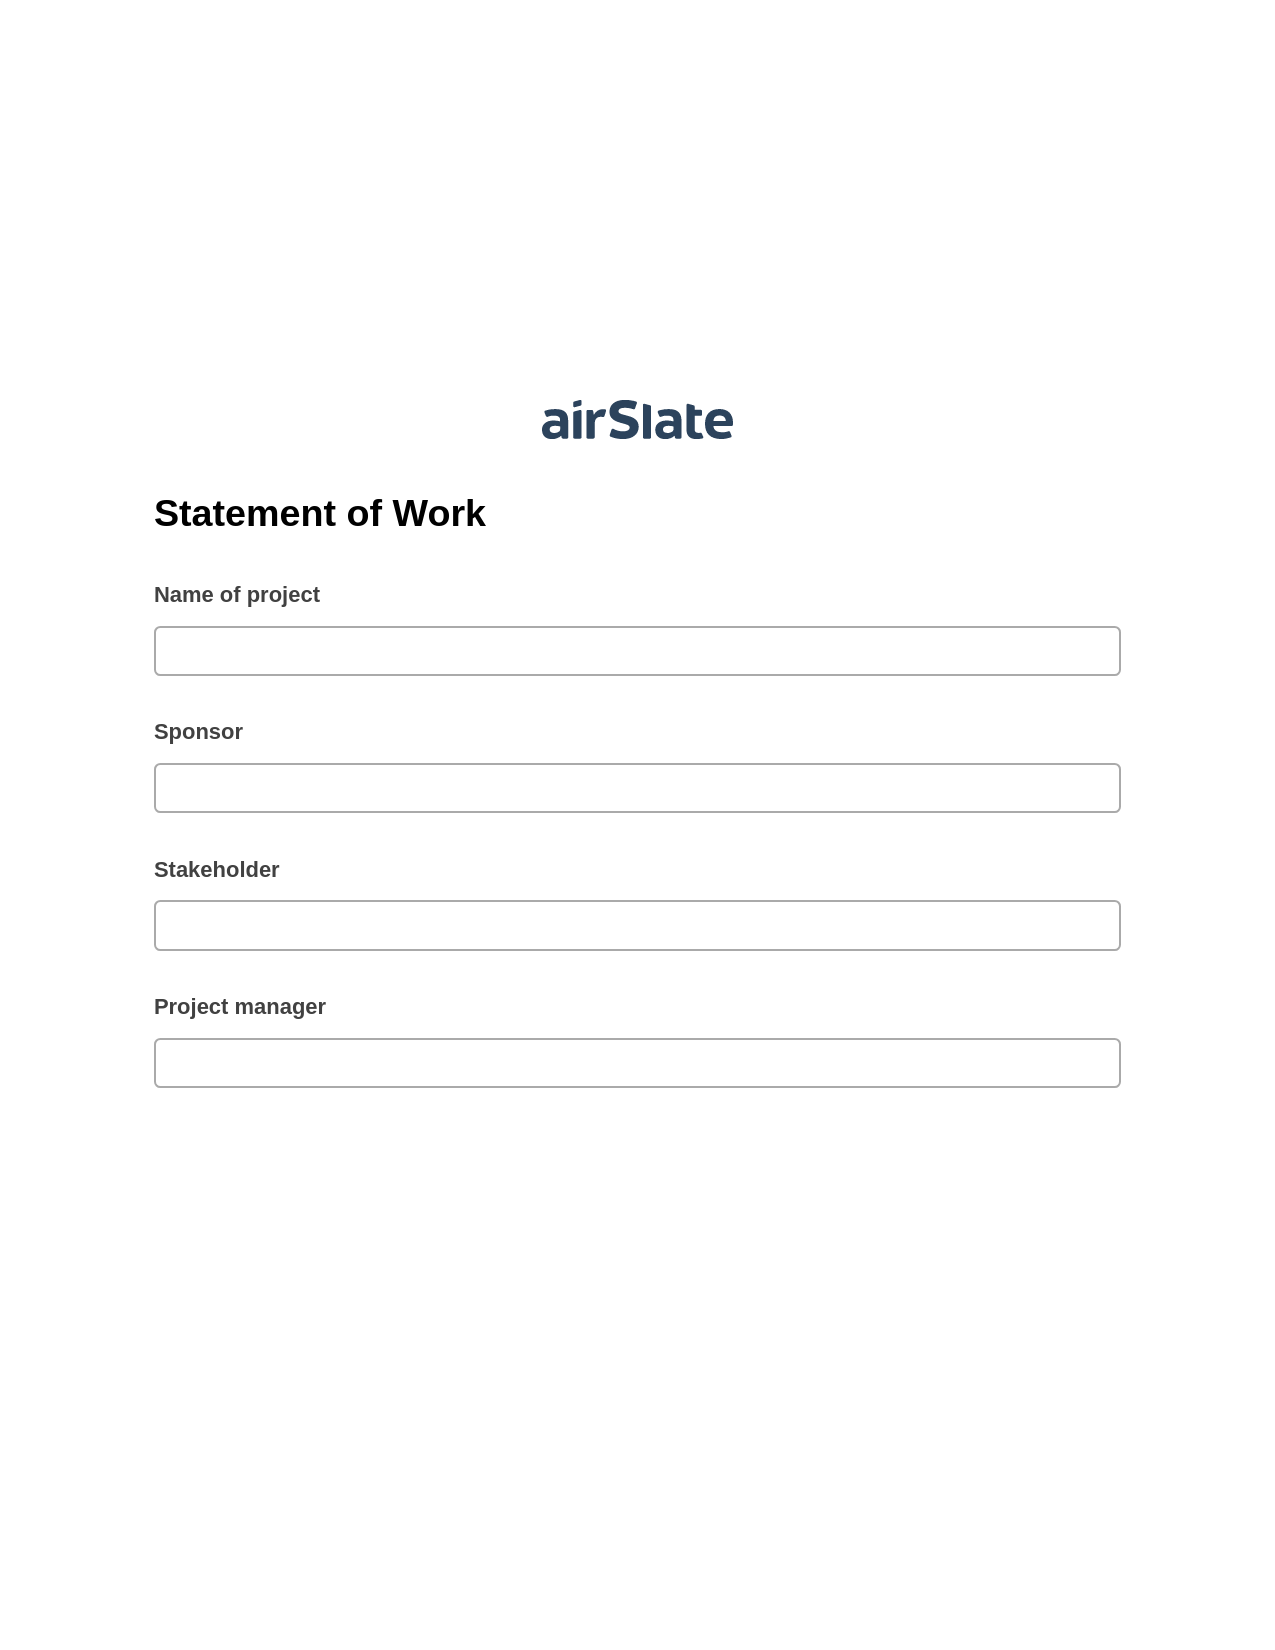 Statement of Work Pre-fill from Salesforce Record Bot, Google Cloud Print Bot, Post-finish Document Bot